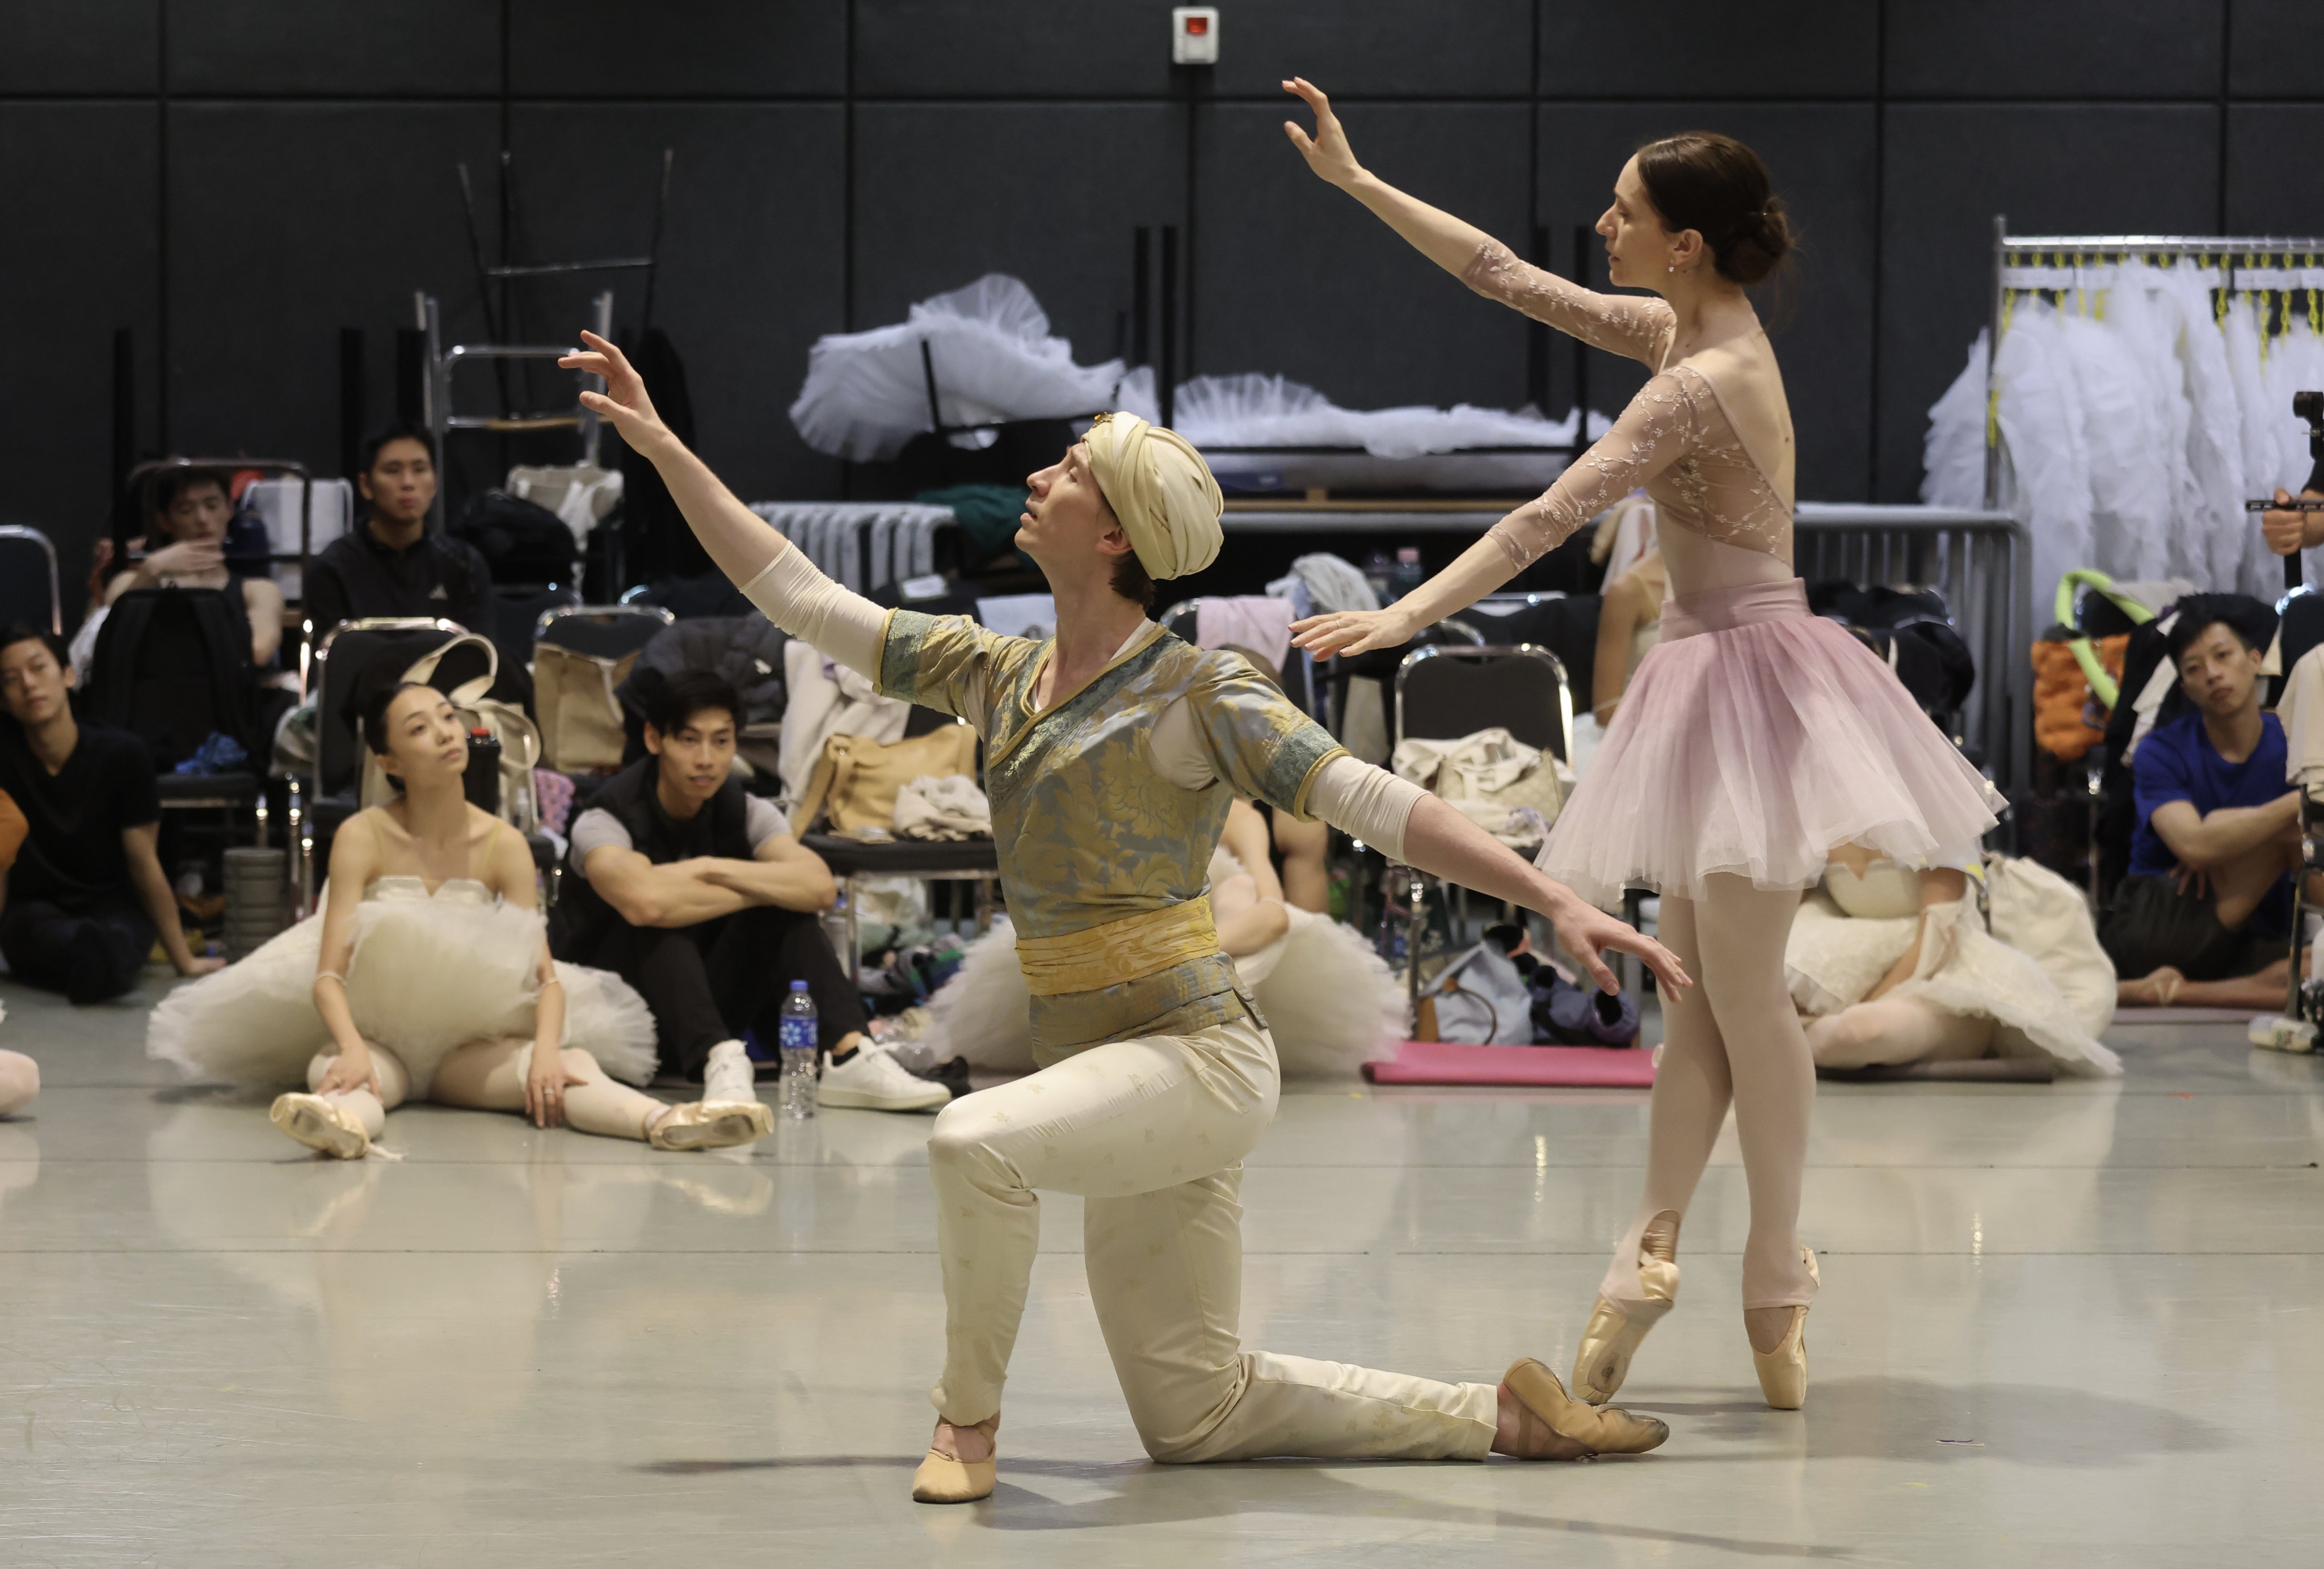 Marianela Nunez (right) and Vadim Muntagirov, from the UK’s Royal Ballet, rehearse for their roles as guest dancers with the Hong Kong Ballet for two performances of “La Bayadere”. Photo: Jonathan Wong